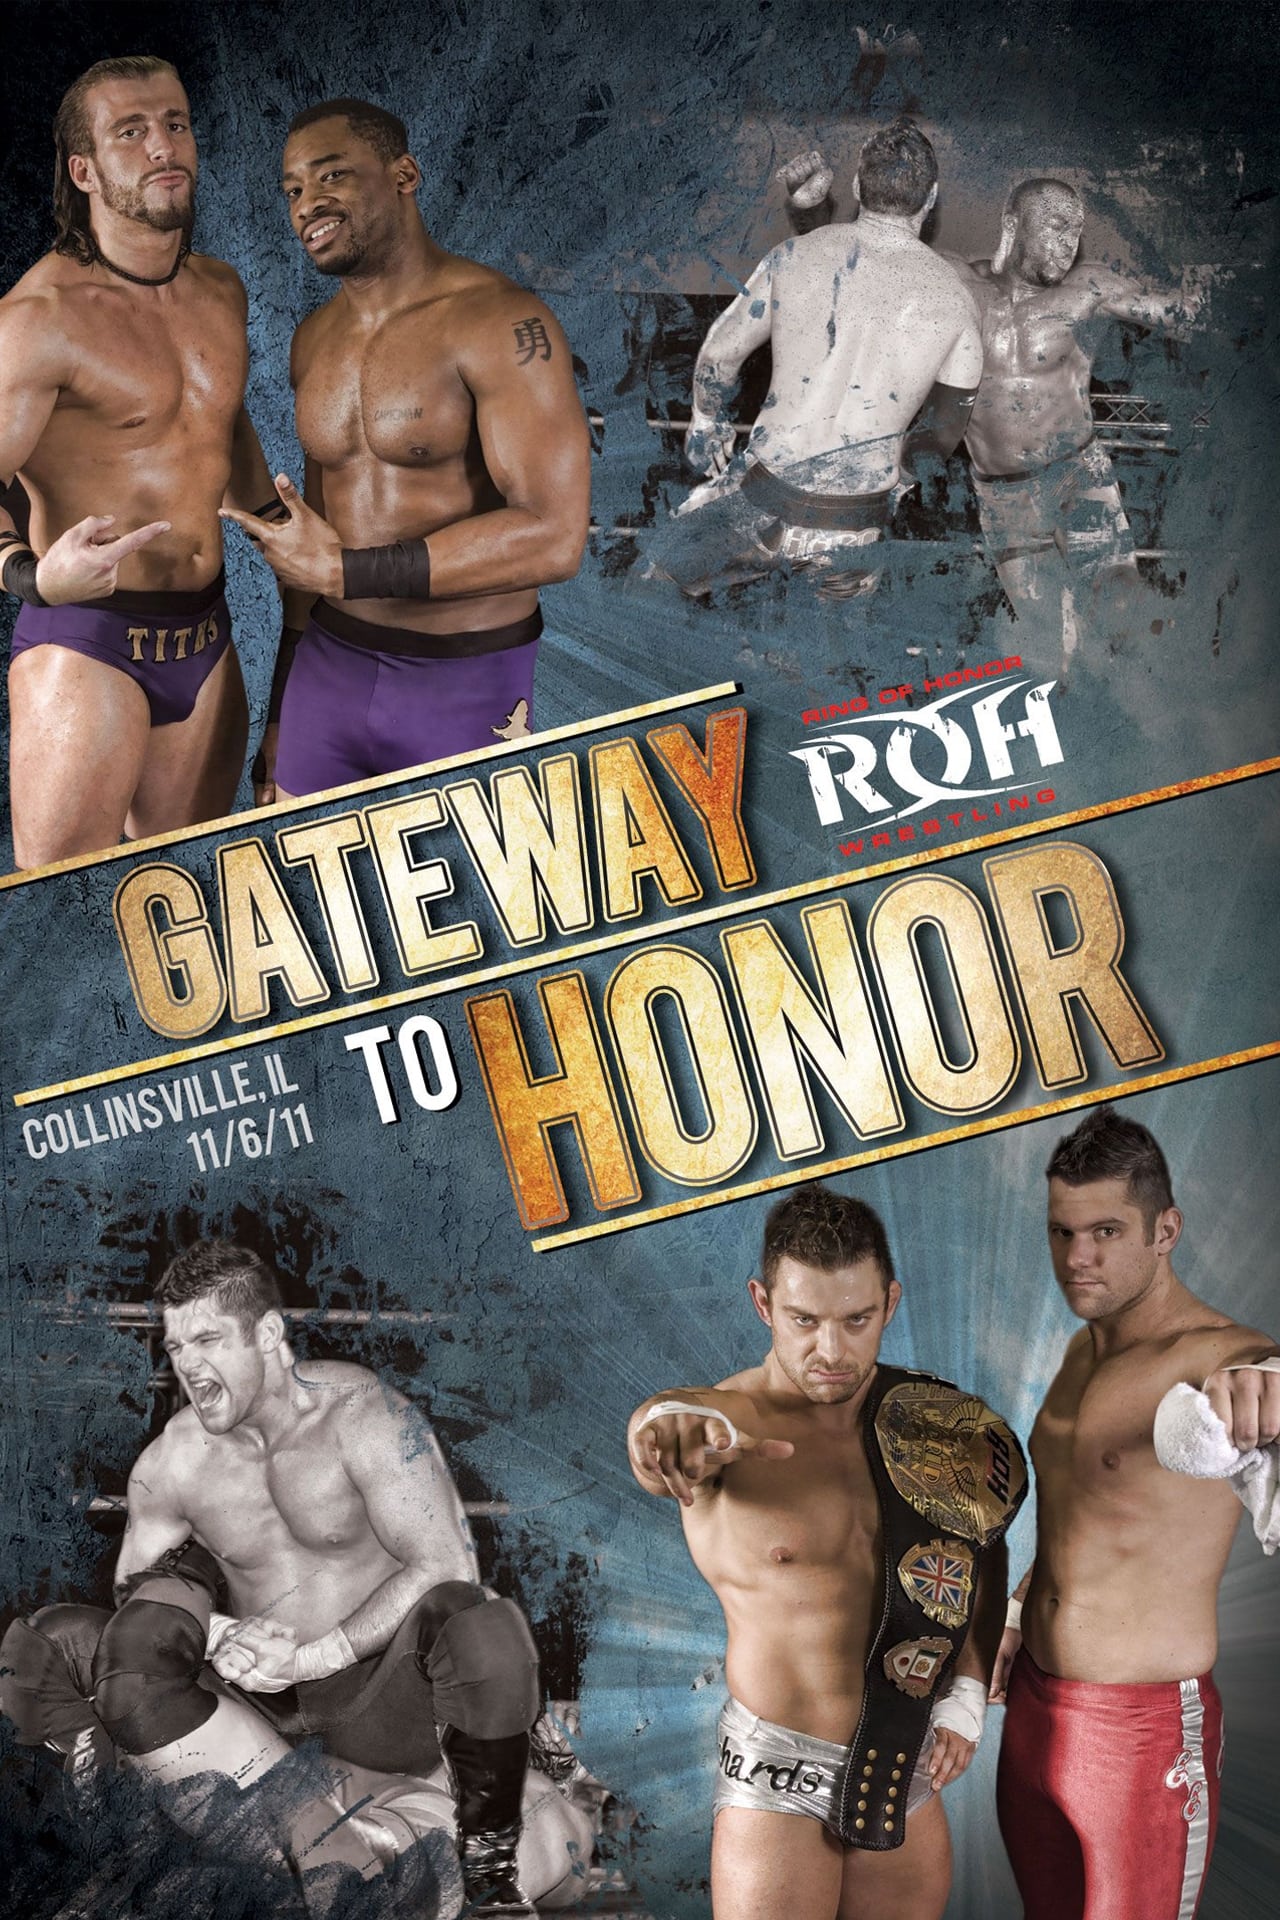 ROH: Gateway To Honor